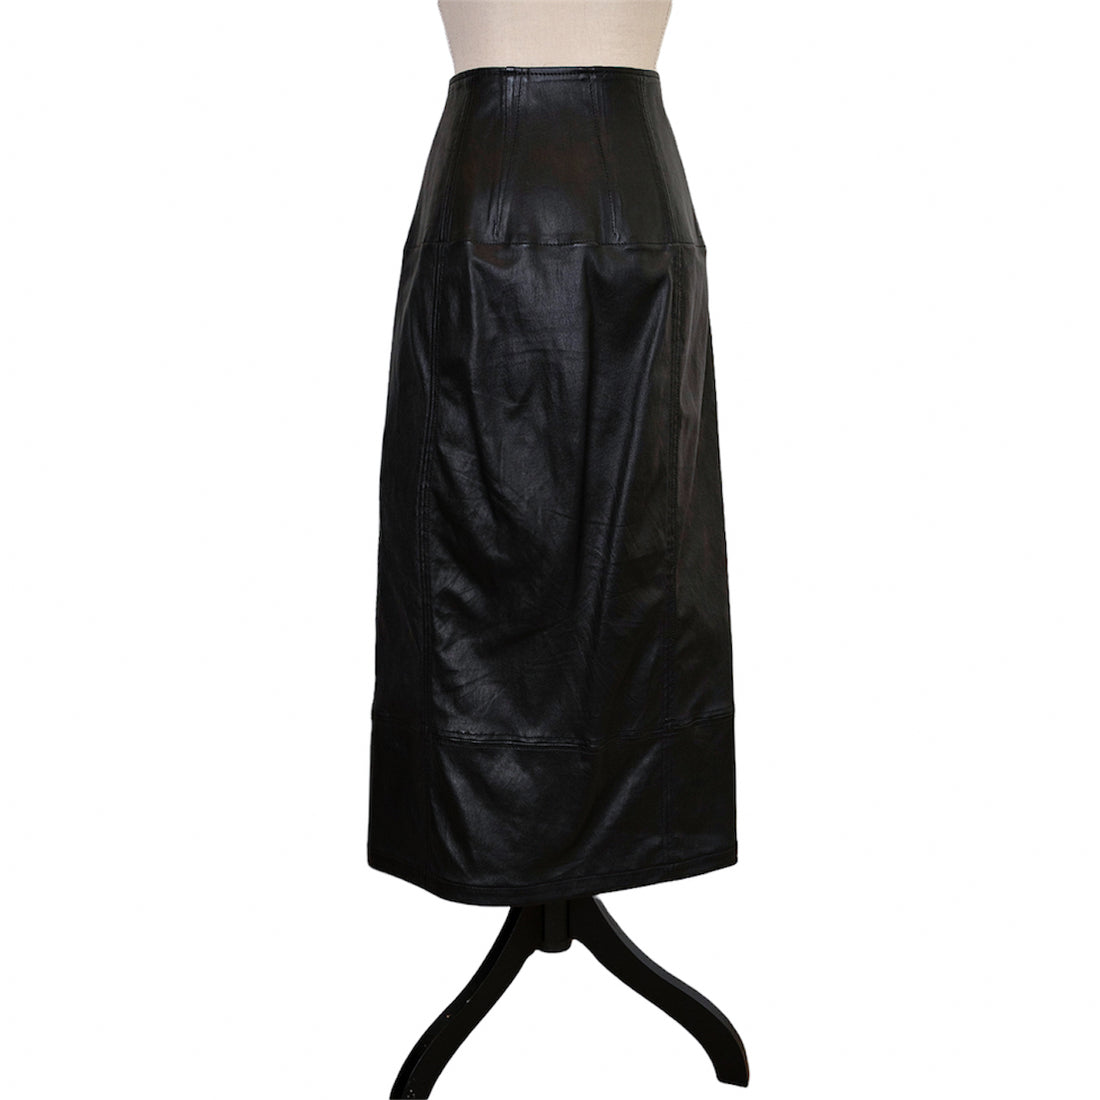 Celine leather skirt with buttons